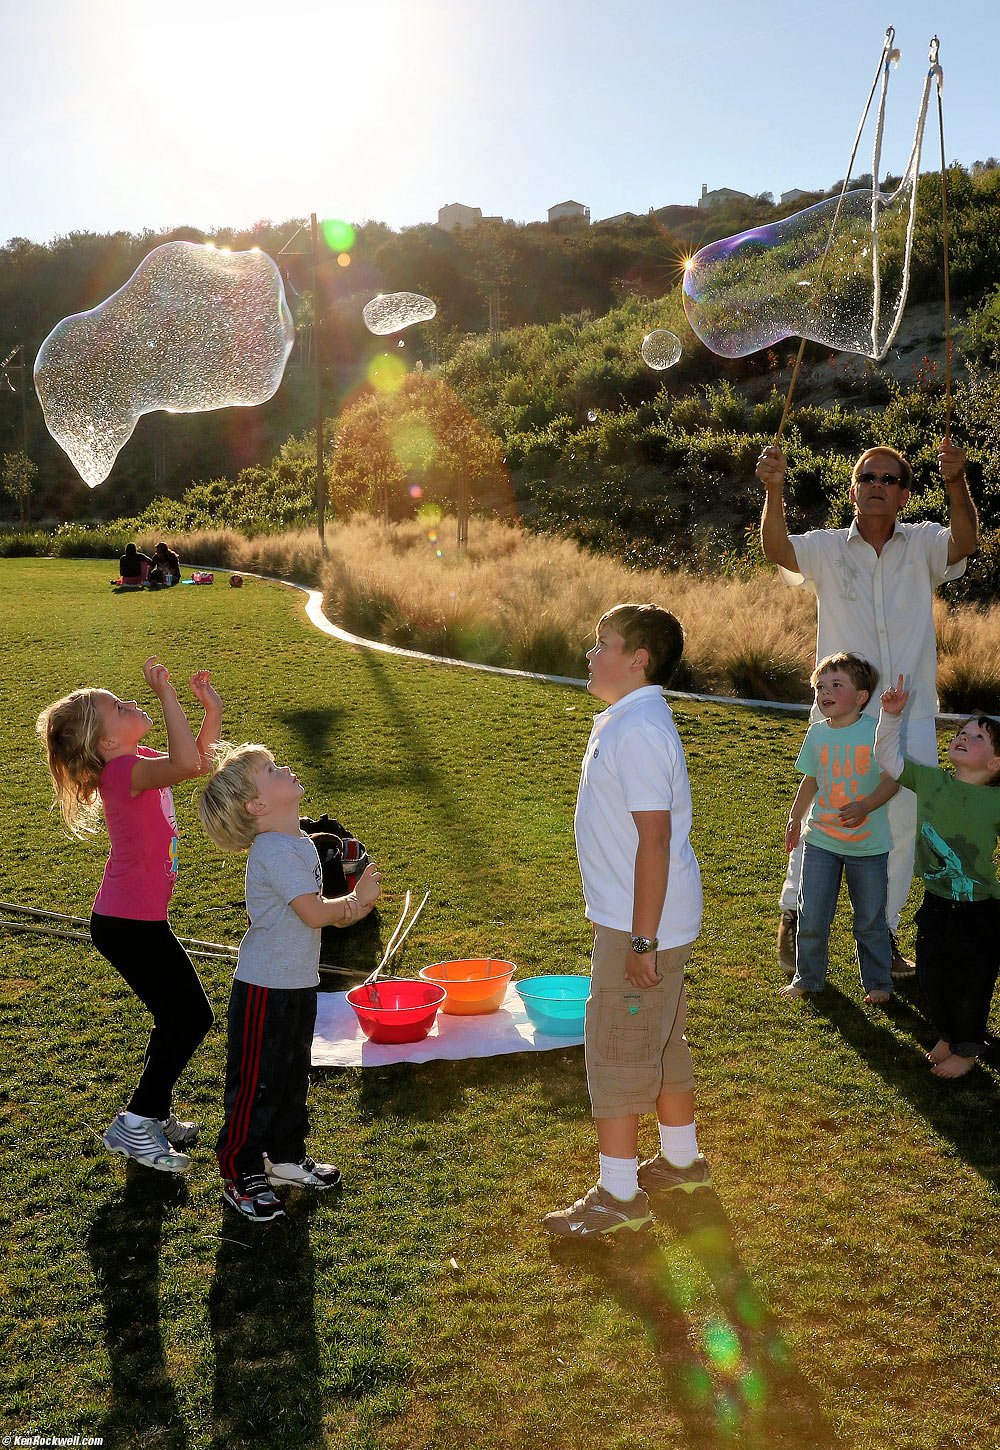 Katie, Charlie and Ryan backlit with big bubbles